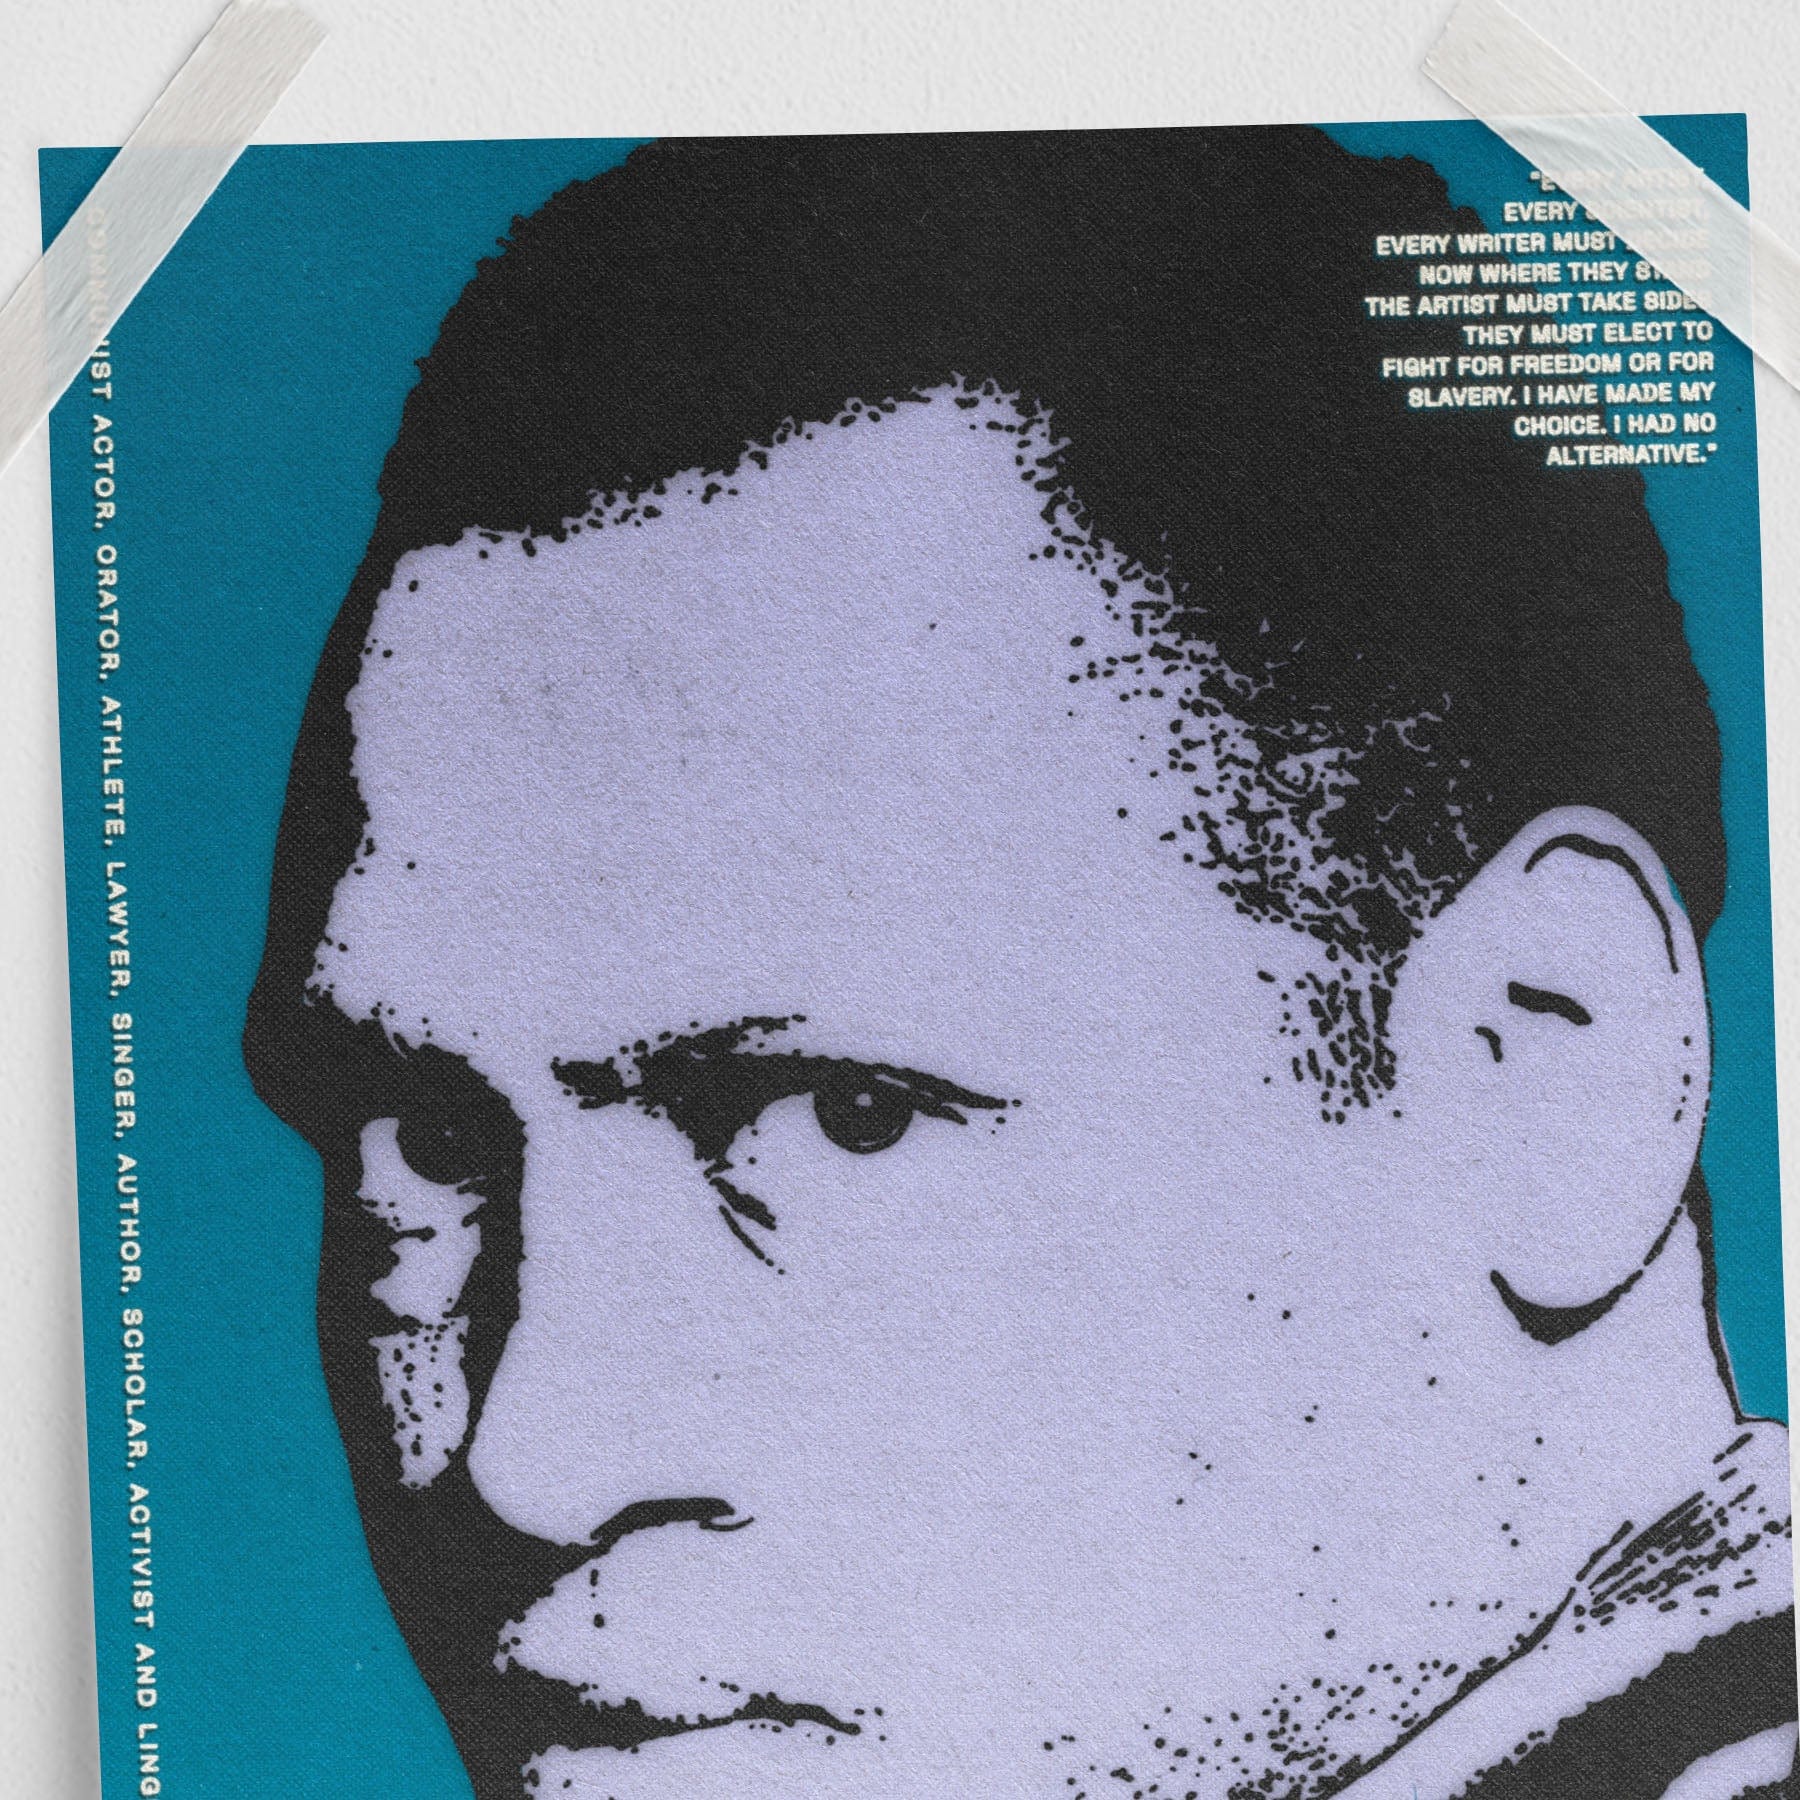 Paul Robeson (11 x 17 Poster print)